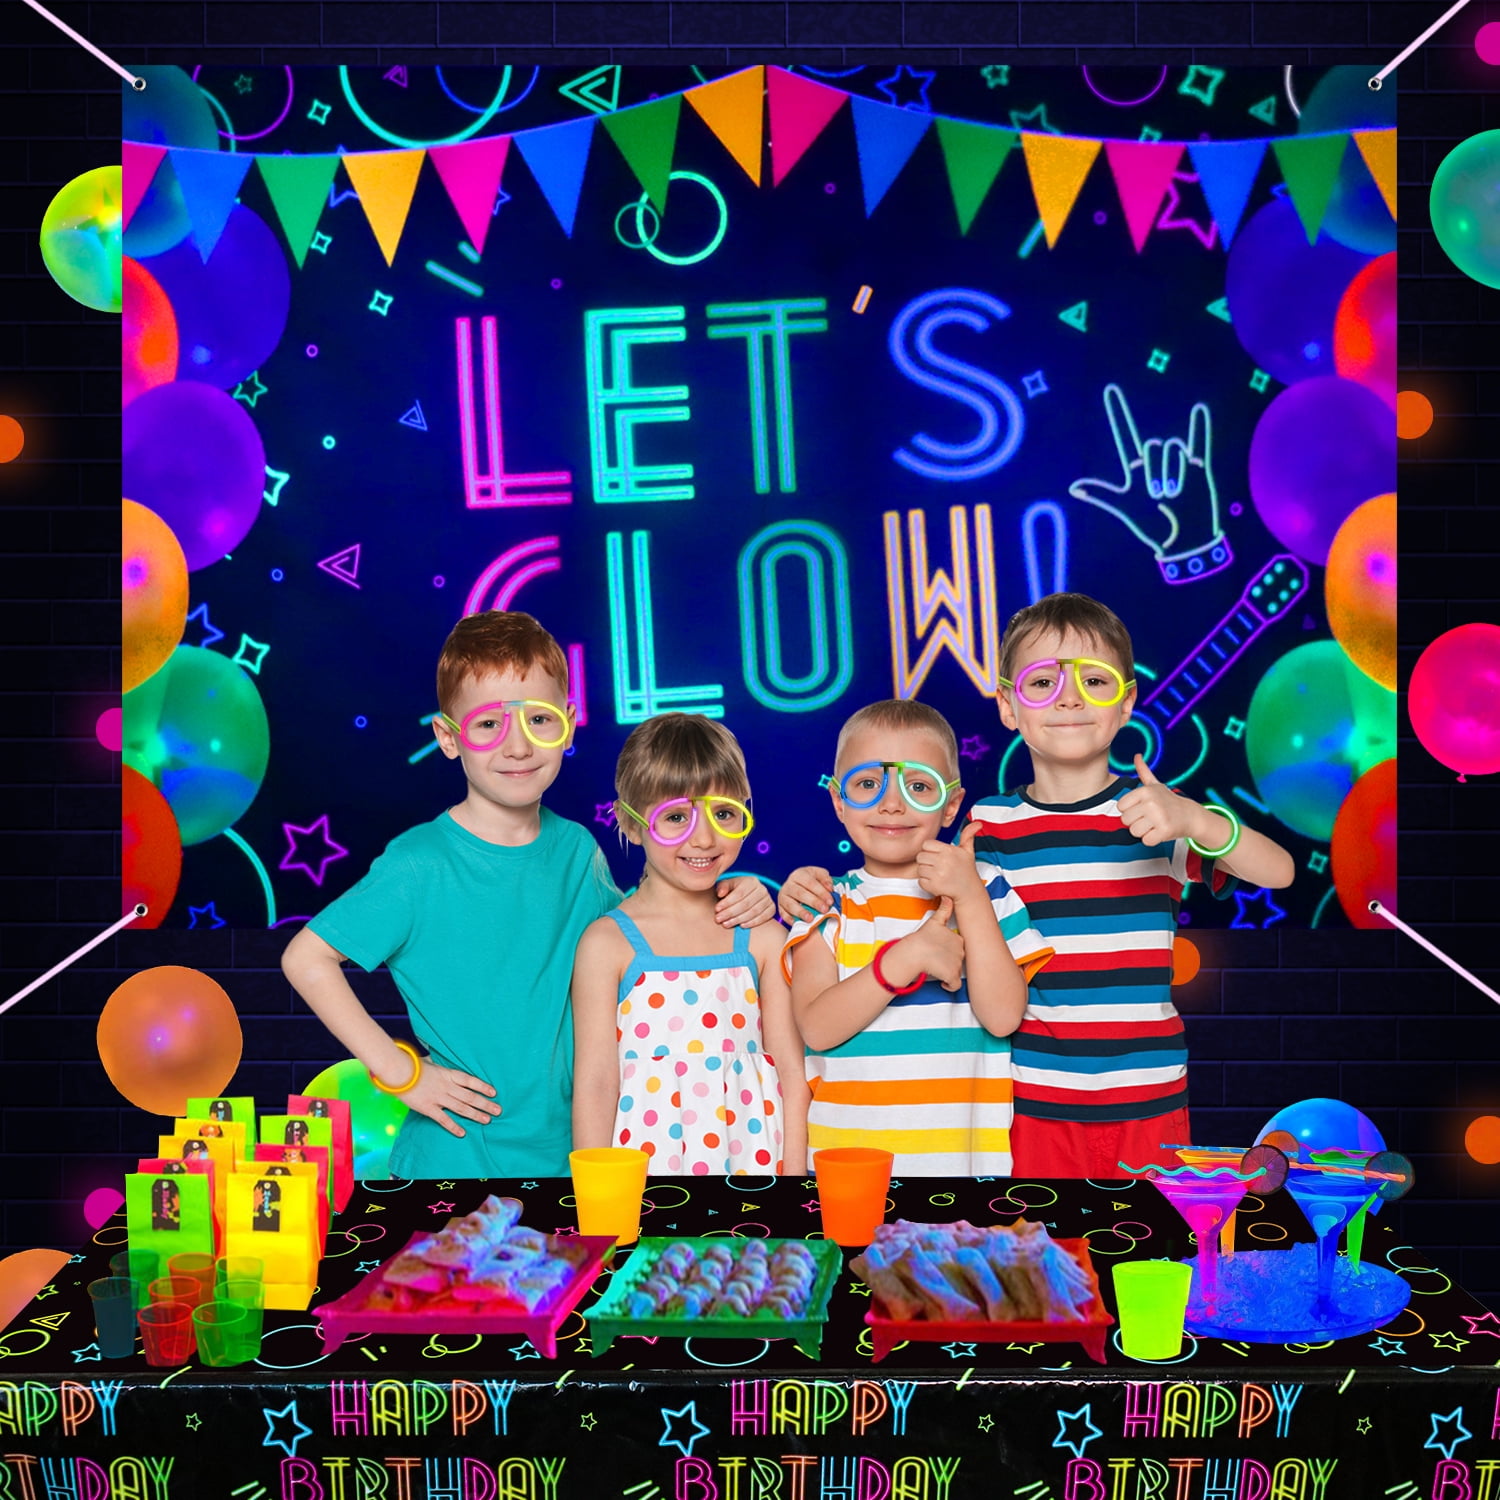 Let's Glow Splatter Photo Background, Glow Neon Party Backdrop, Blacklight  Disco Retro Dance Party Decoration Supplies Birthday Party Banner 